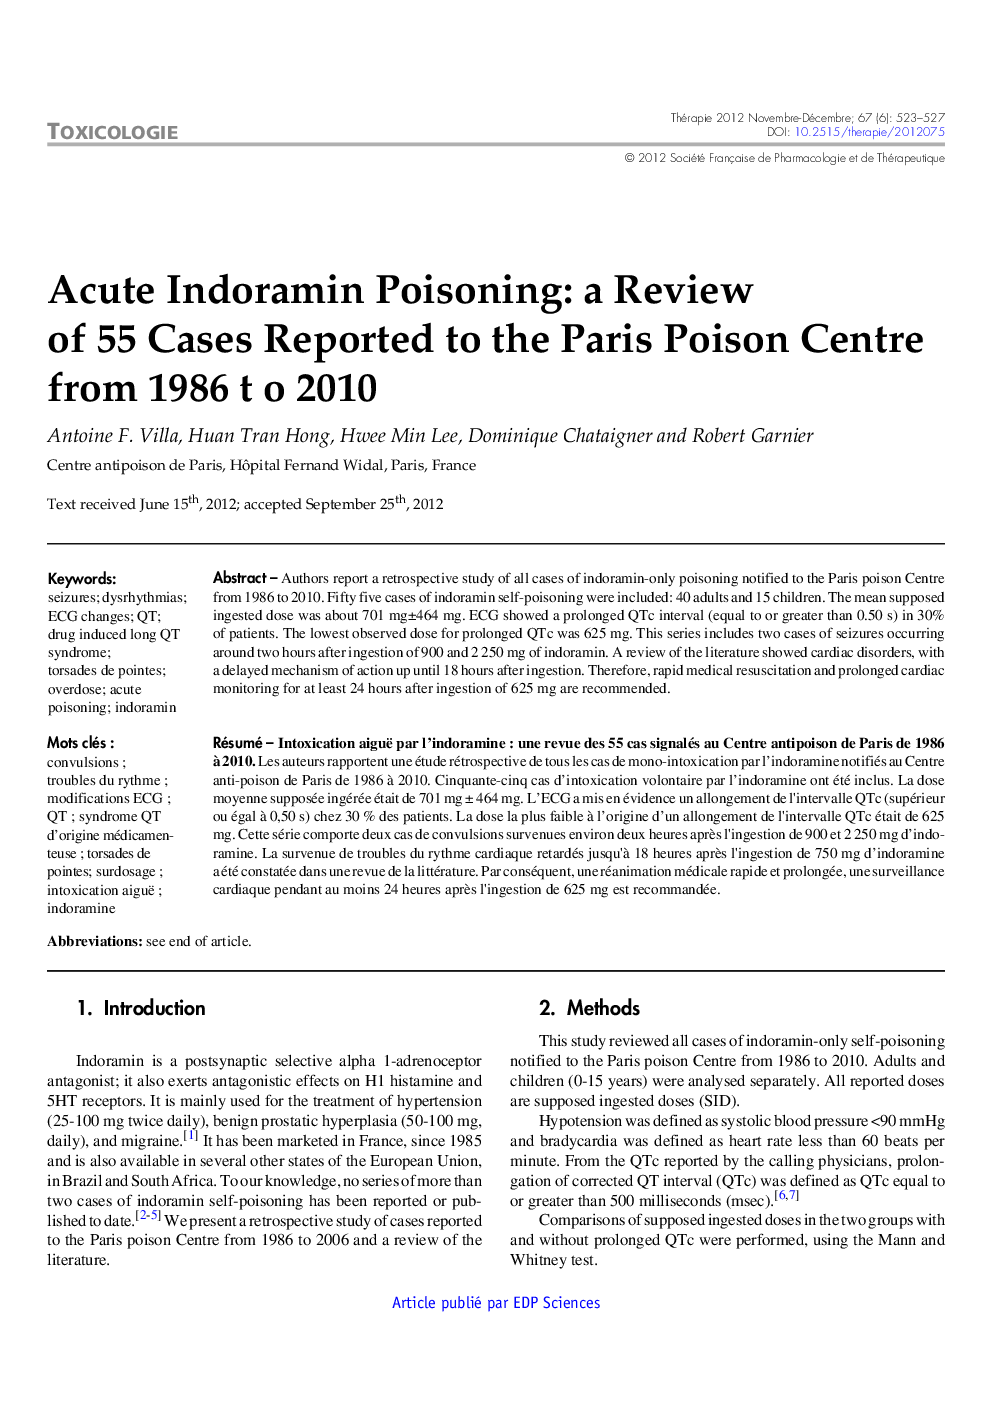 Acute Indoramin Poisoning: a Review of 55 Cases Reported to the Paris Poison Centre from 1986 to 2010